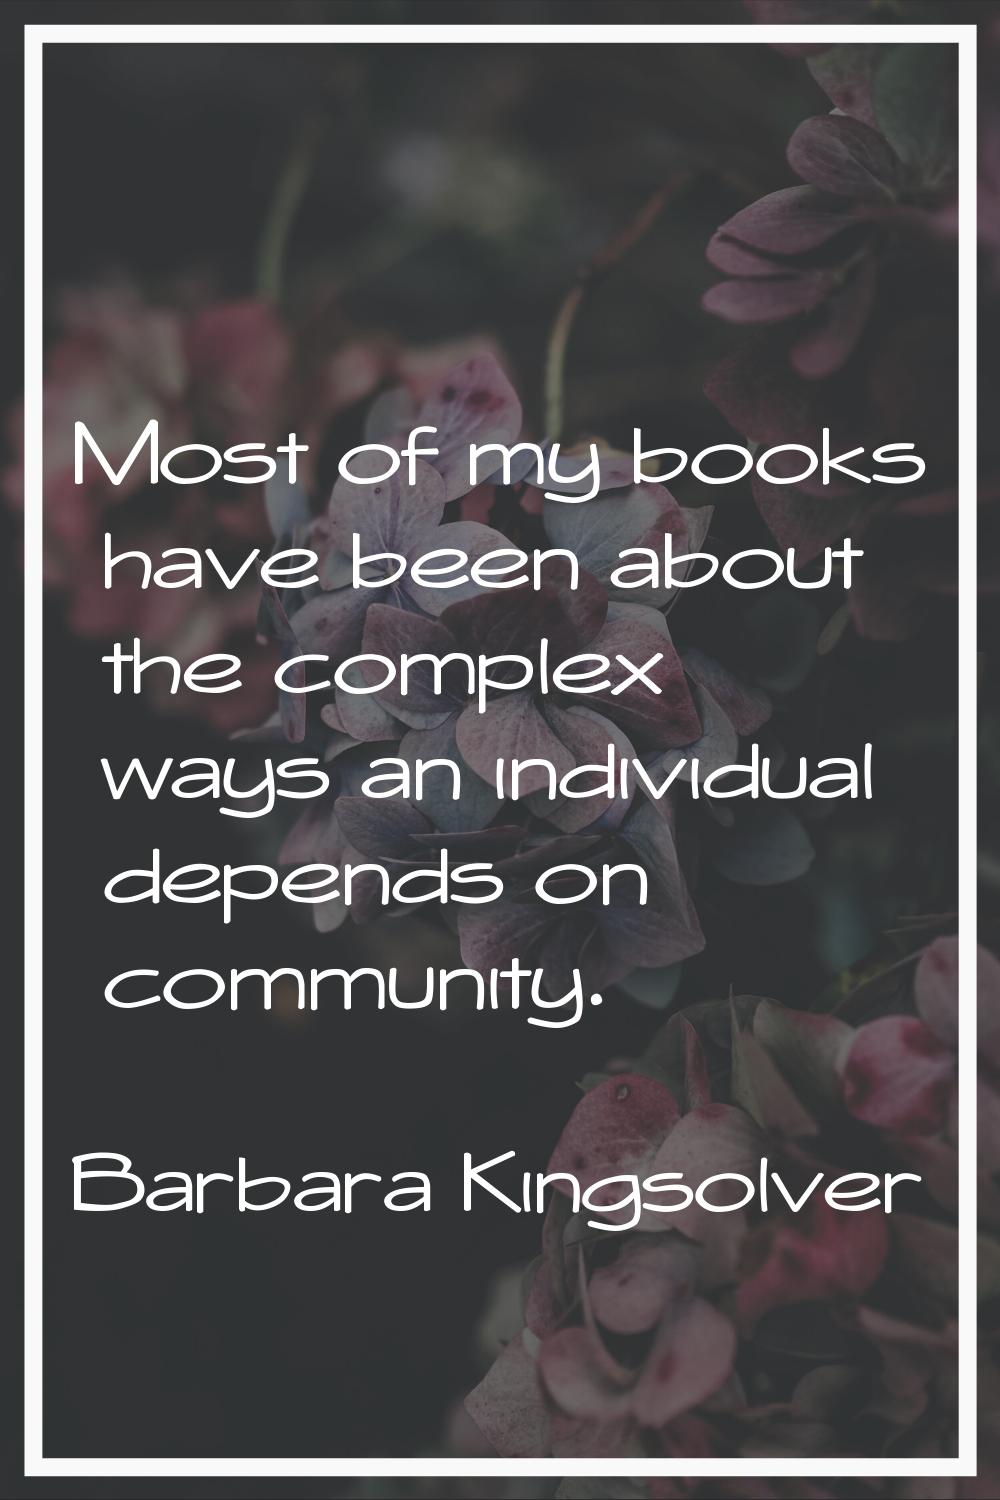 Most of my books have been about the complex ways an individual depends on community.